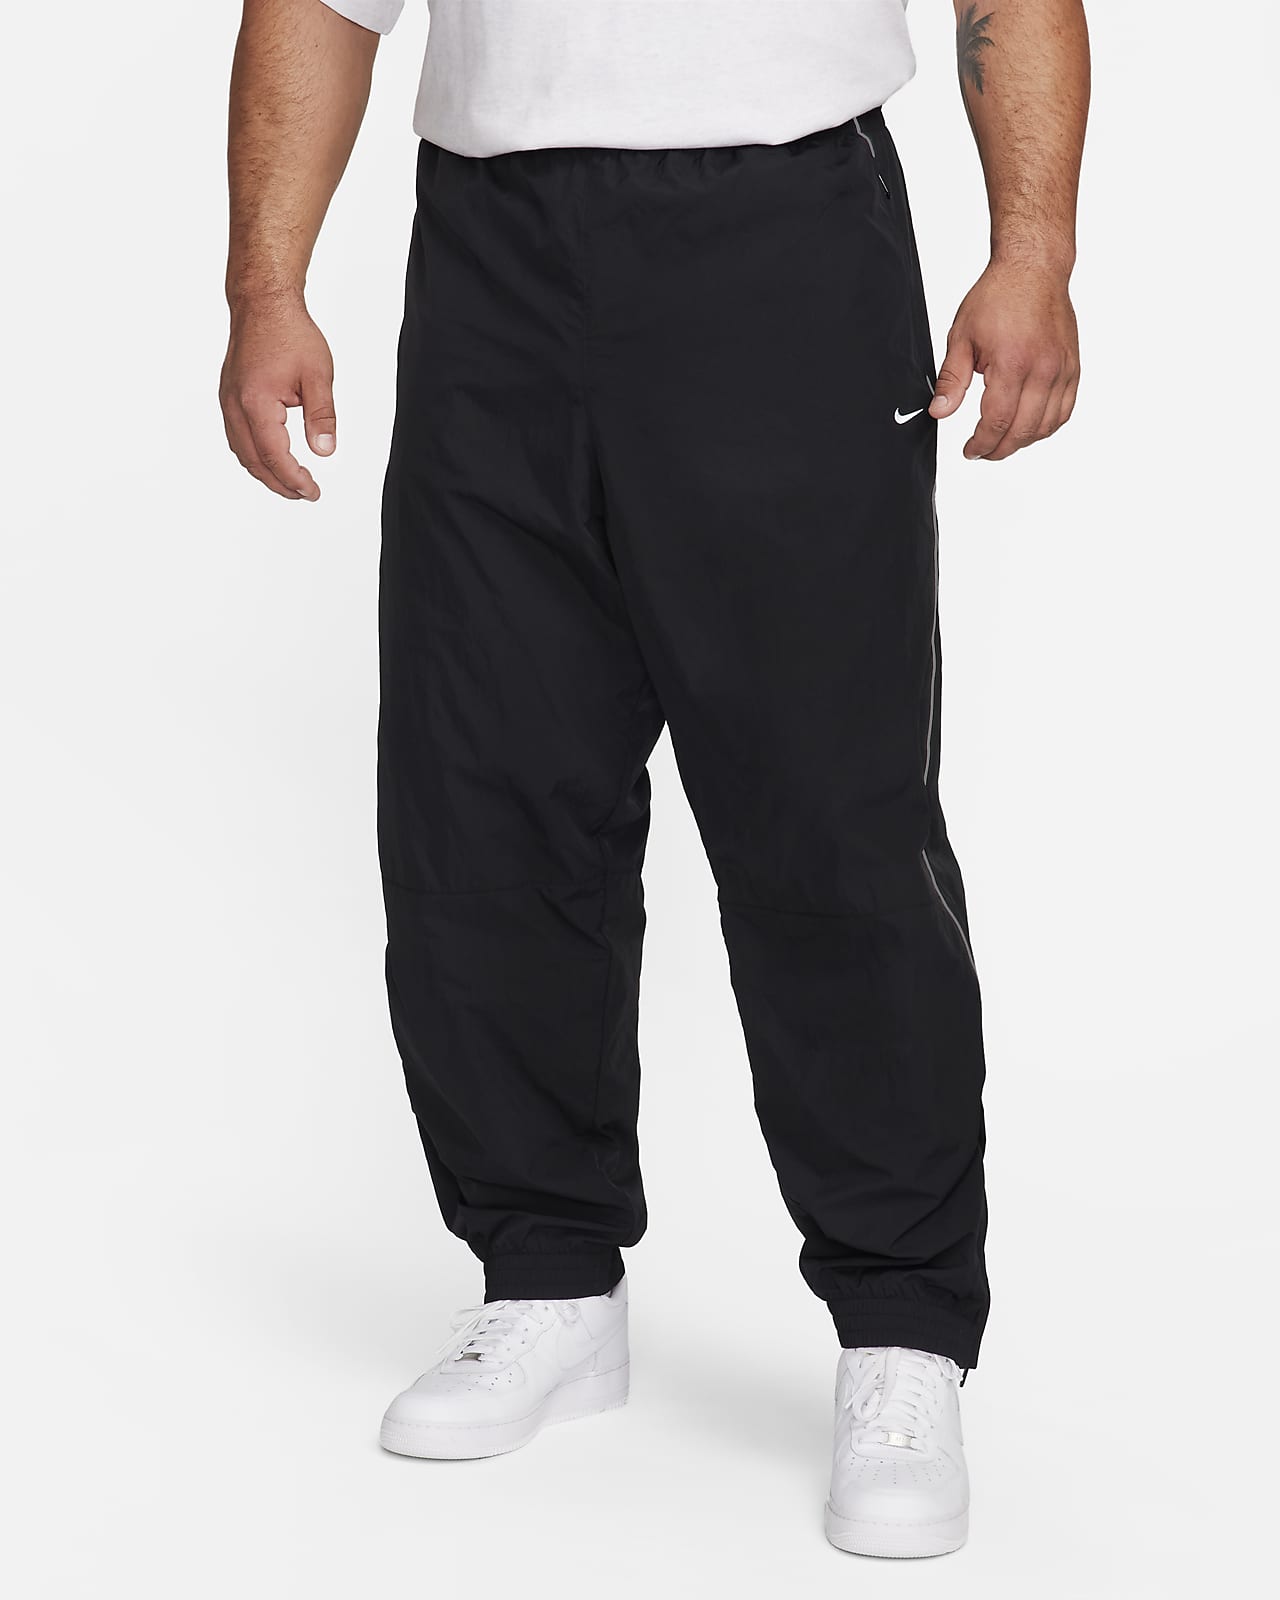 Nike clear the mind mini swoosh joggers in lemon yellow - ShopStyle  Activewear Trousers